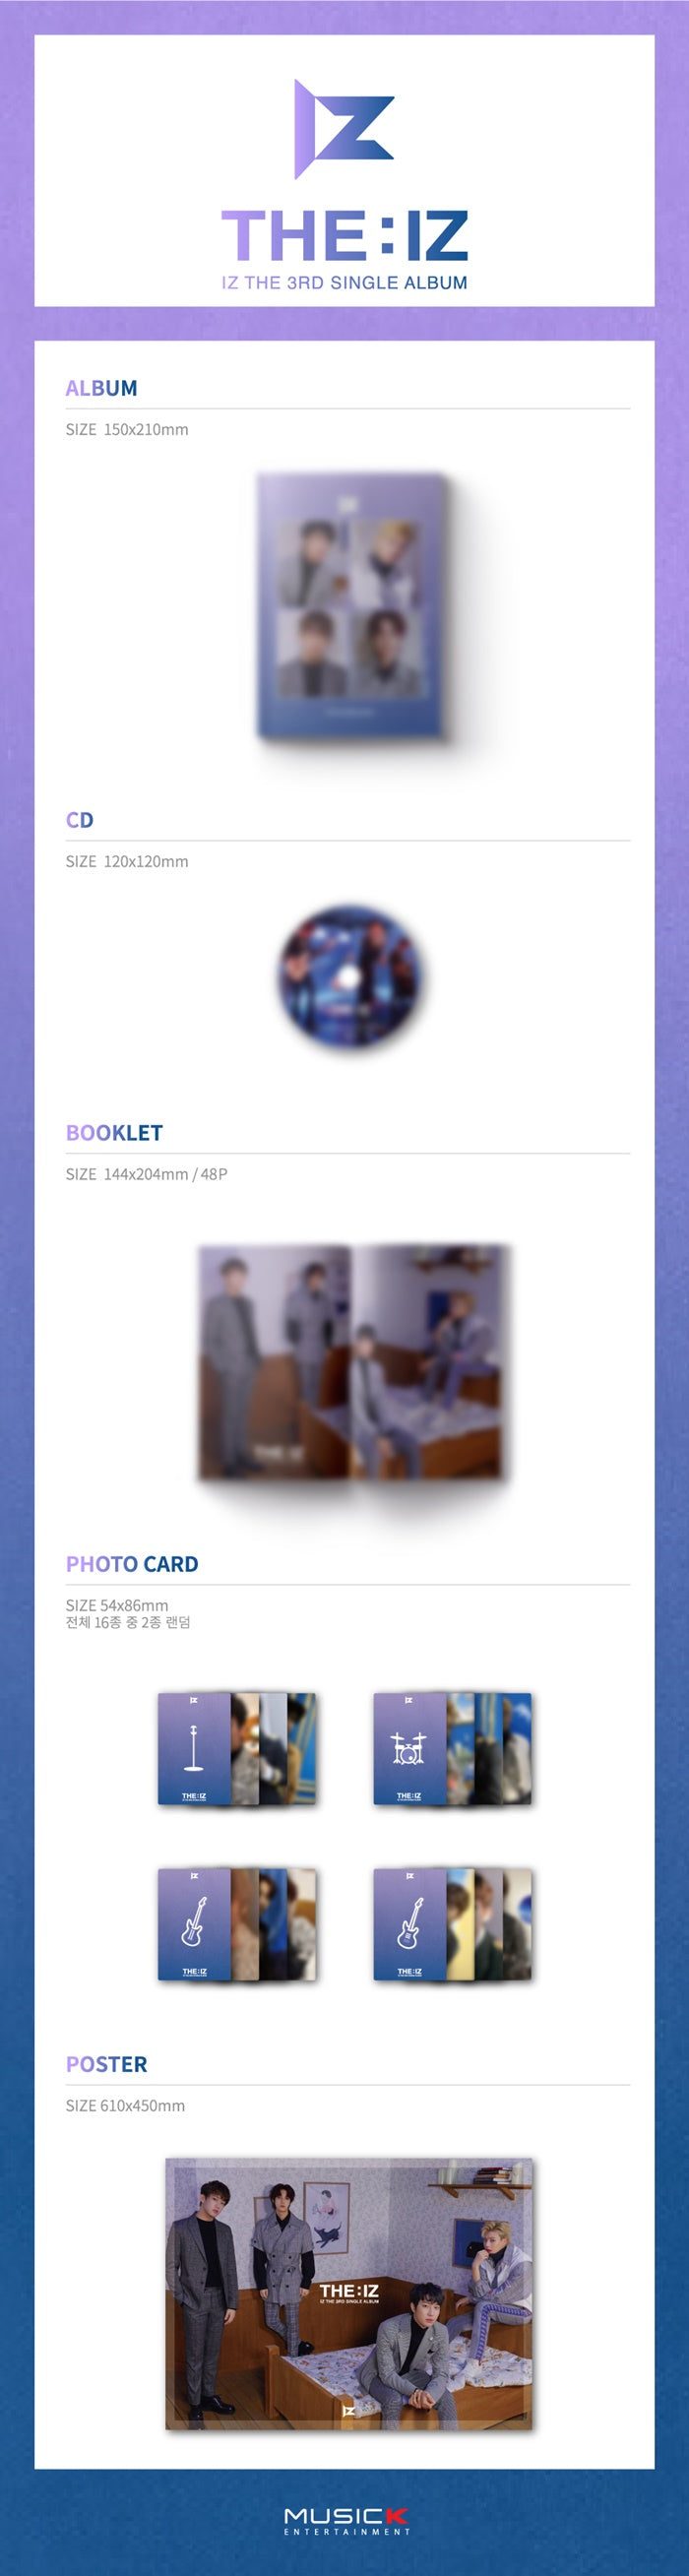 1 CD
1 Booklet (48 pages)
2 Photo Cards